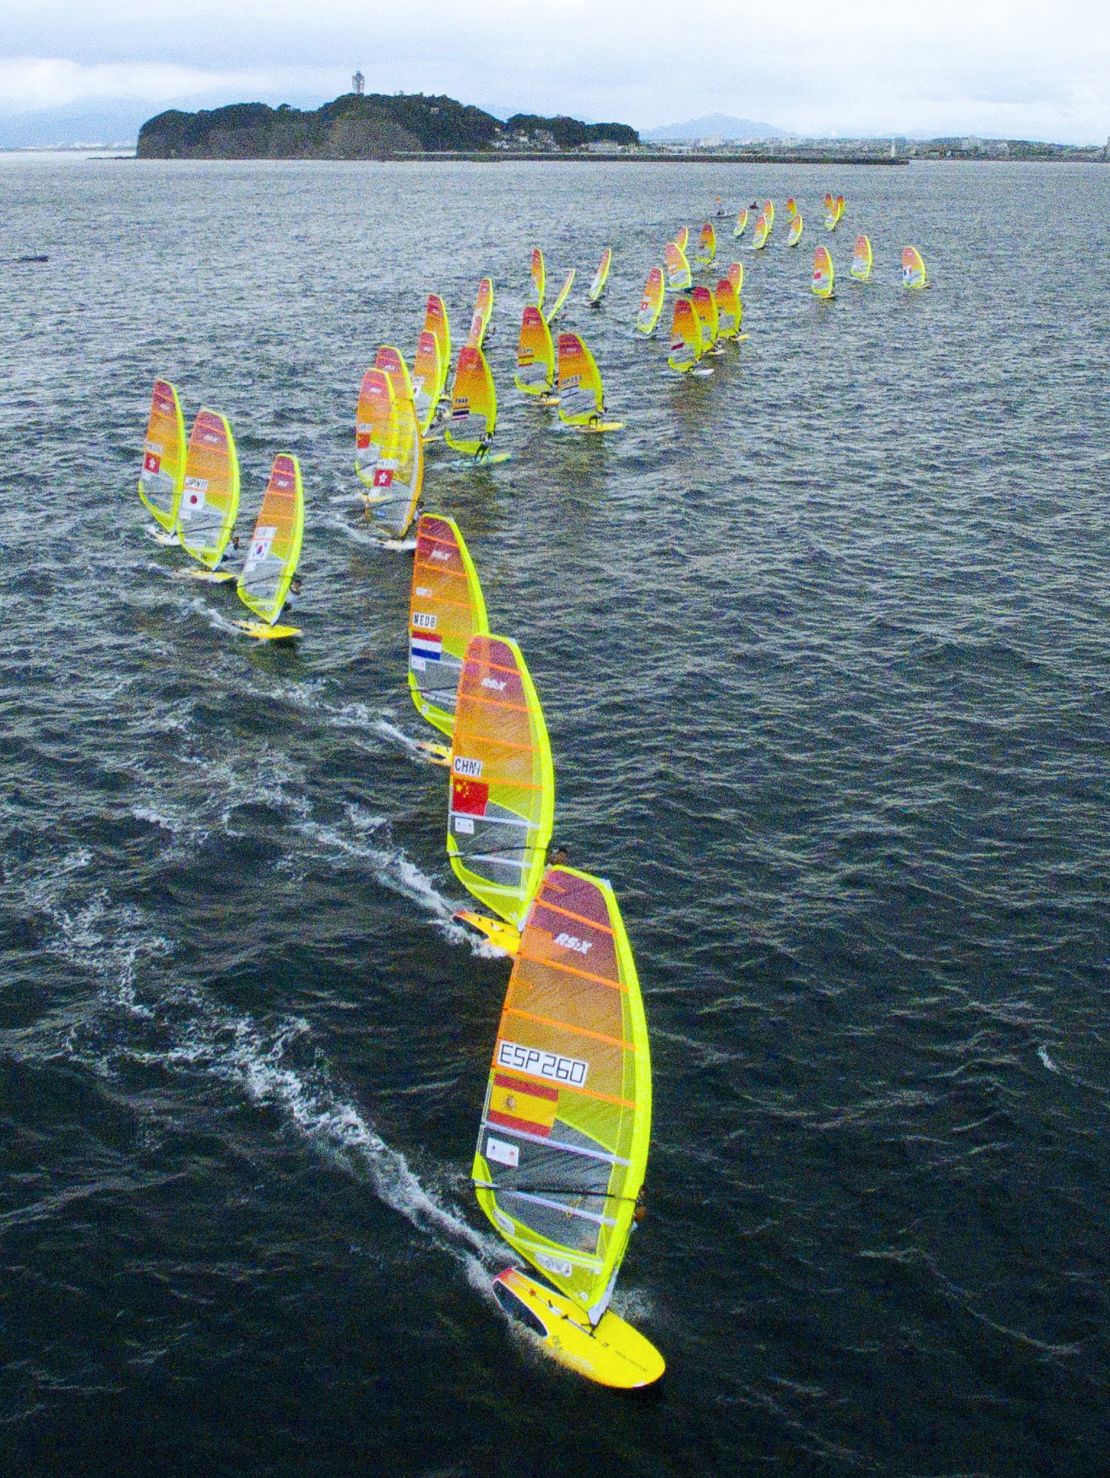 Competitors taking part in the men's RS:X class windsurfing event as part of the sailing World Cup series.